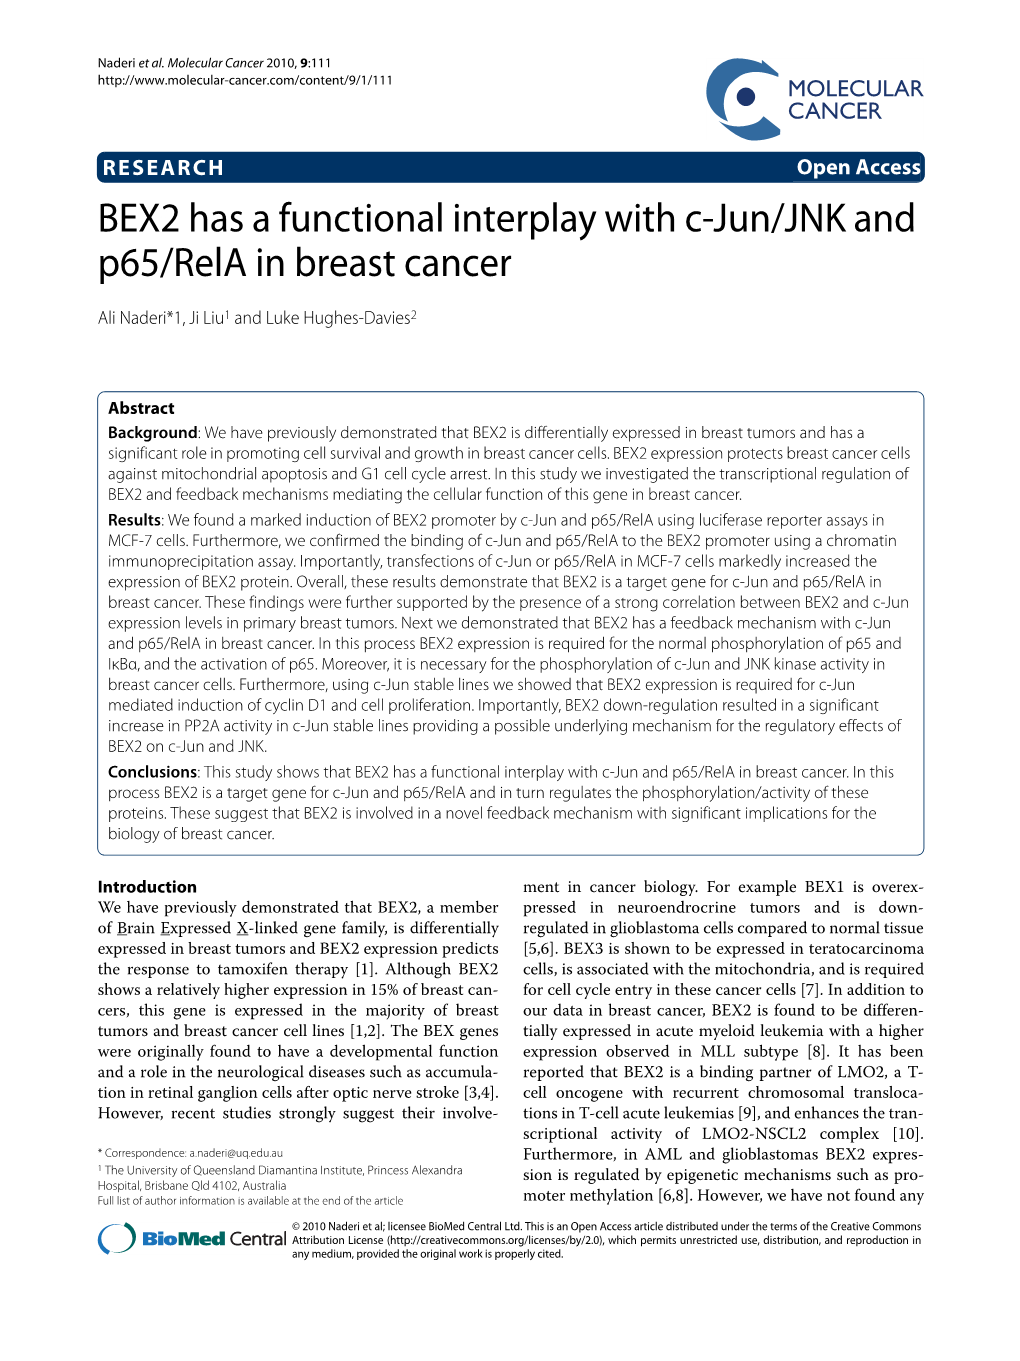 BEX2 Has a Functional Interplay with C-Jun/JNK and P65